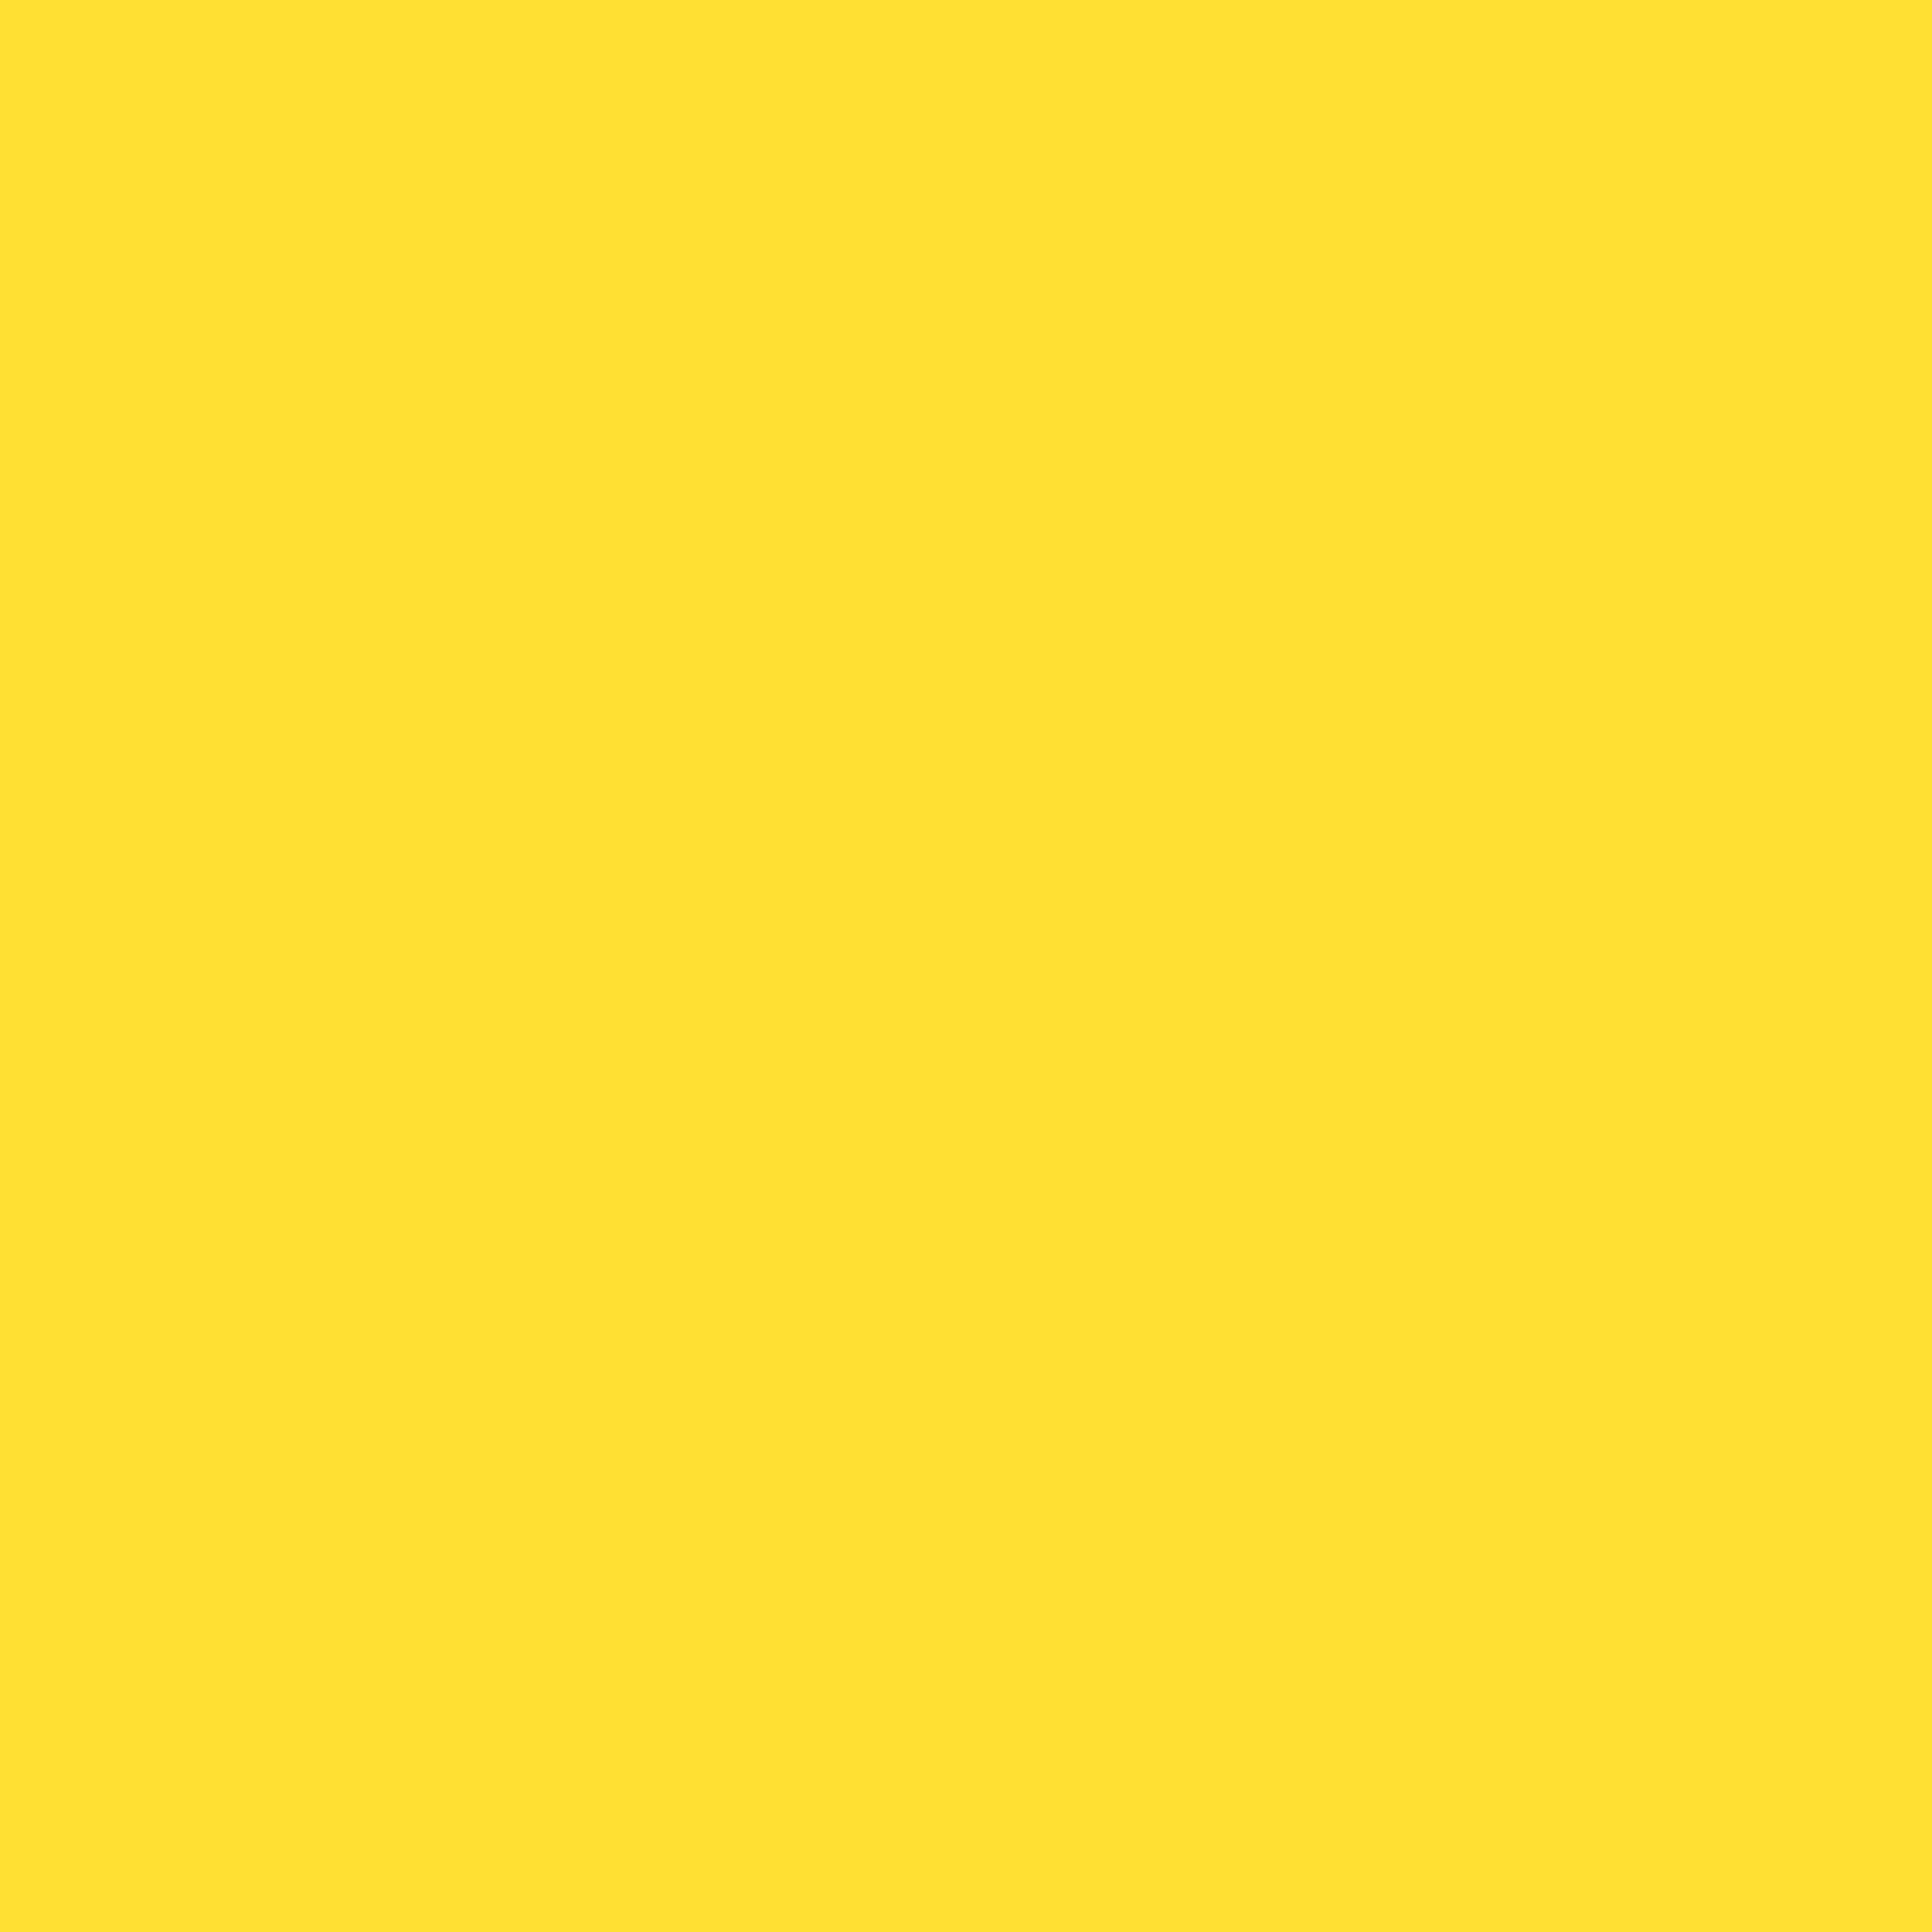 2732x2732 Banana Yellow Solid Color Background